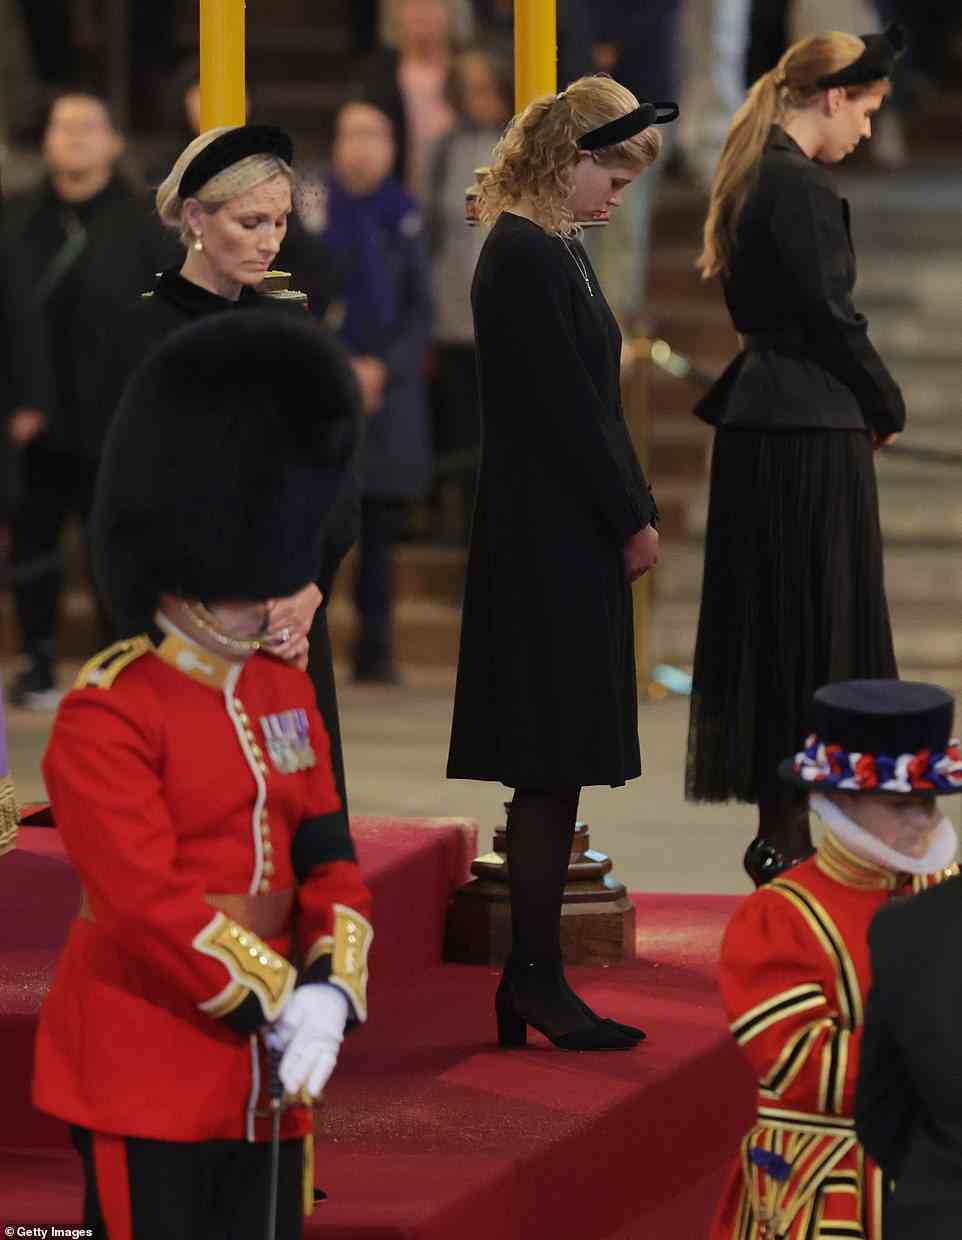 Zara Tindall, Princess Beatrice, Princess Eugenie and Lady Louise Windsor followed in the footsteps of Princess Anne by taking part in a ceremony that has been traditionally reserved for male members of the Royal Family